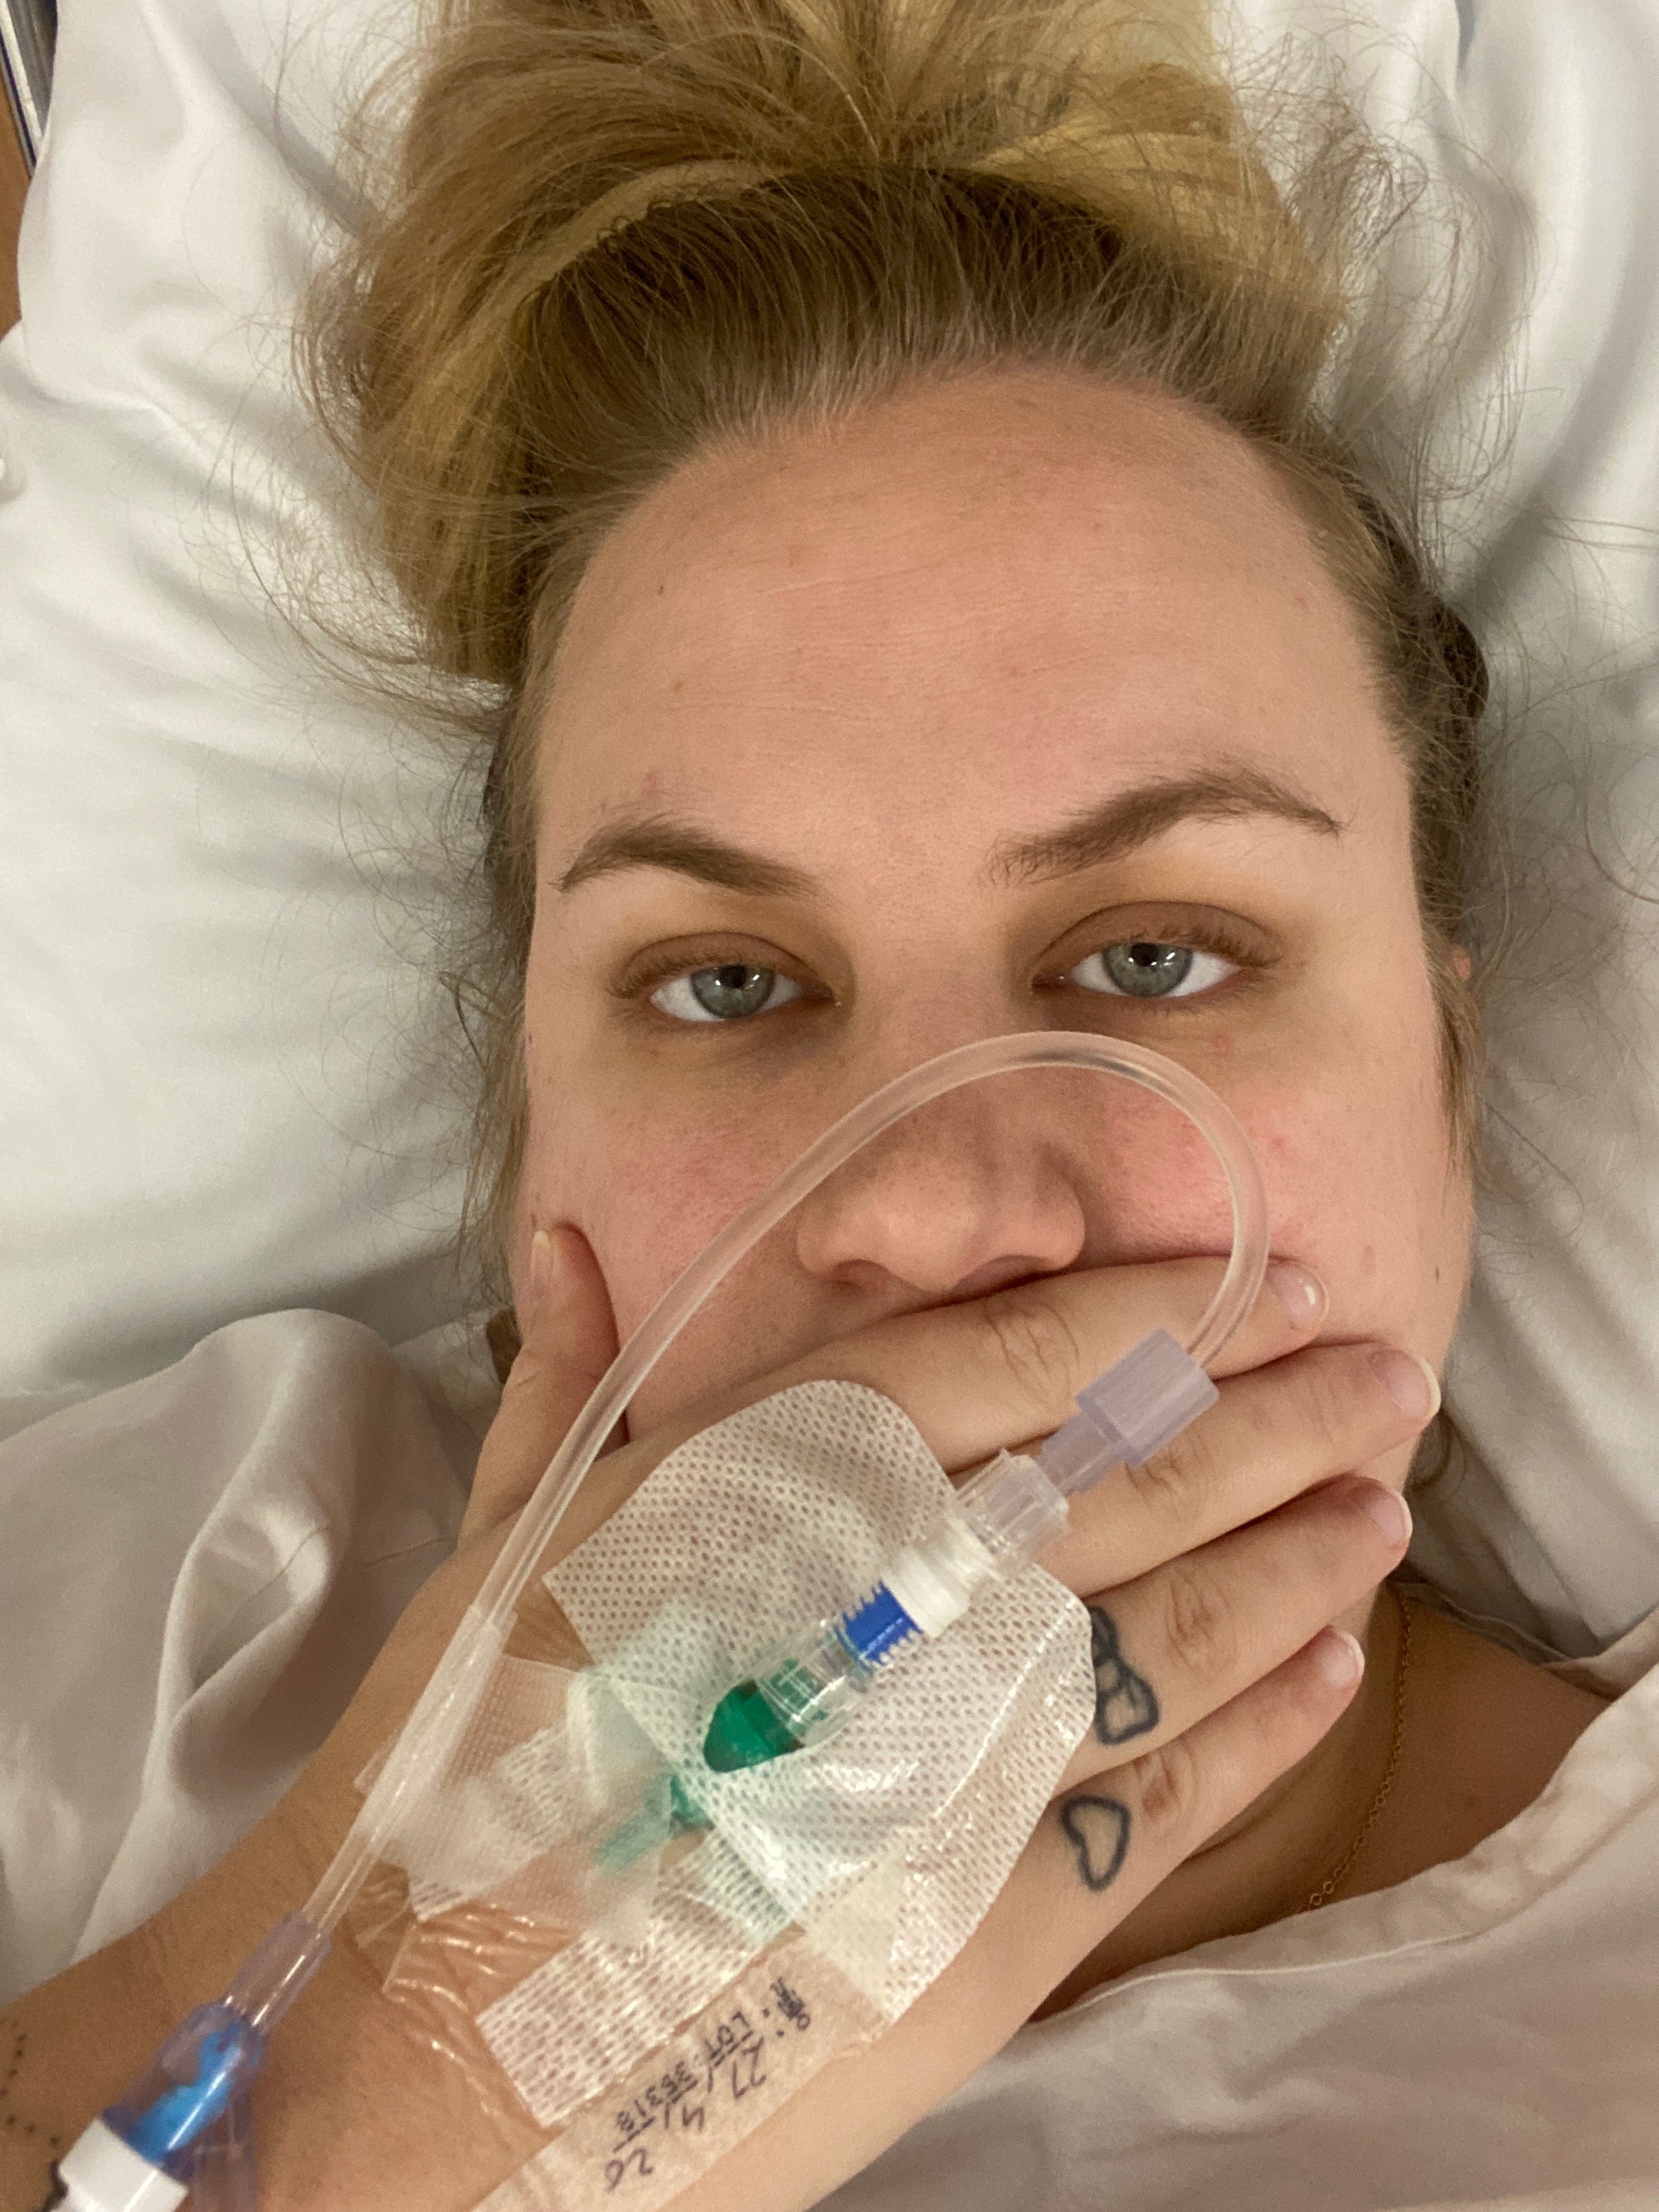 Let's talk about Hyperemesis: Caitlin's Story